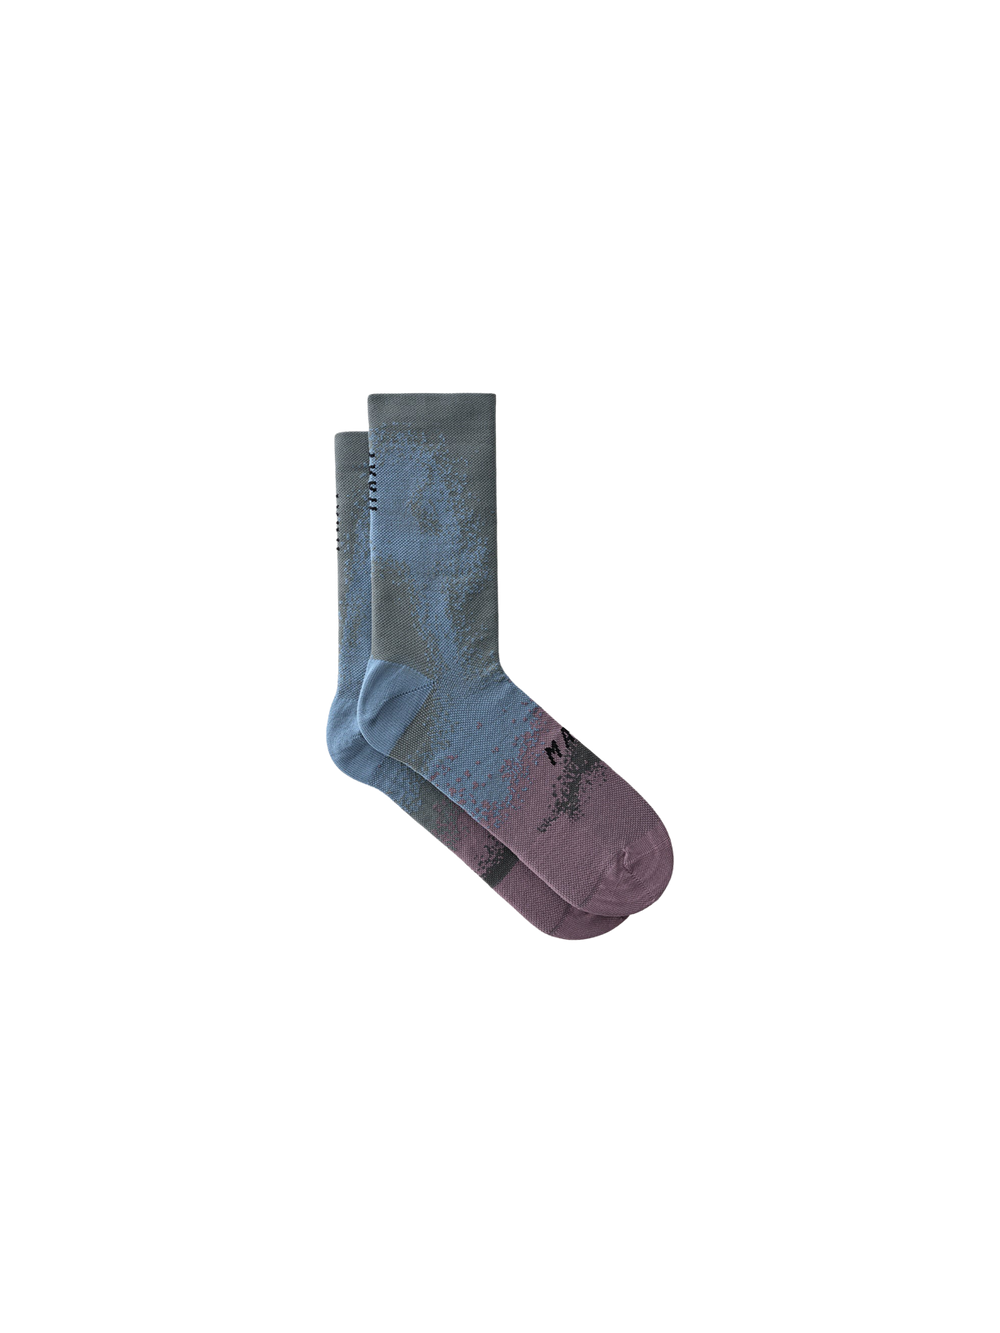 Product Image for Blurred Out Sock